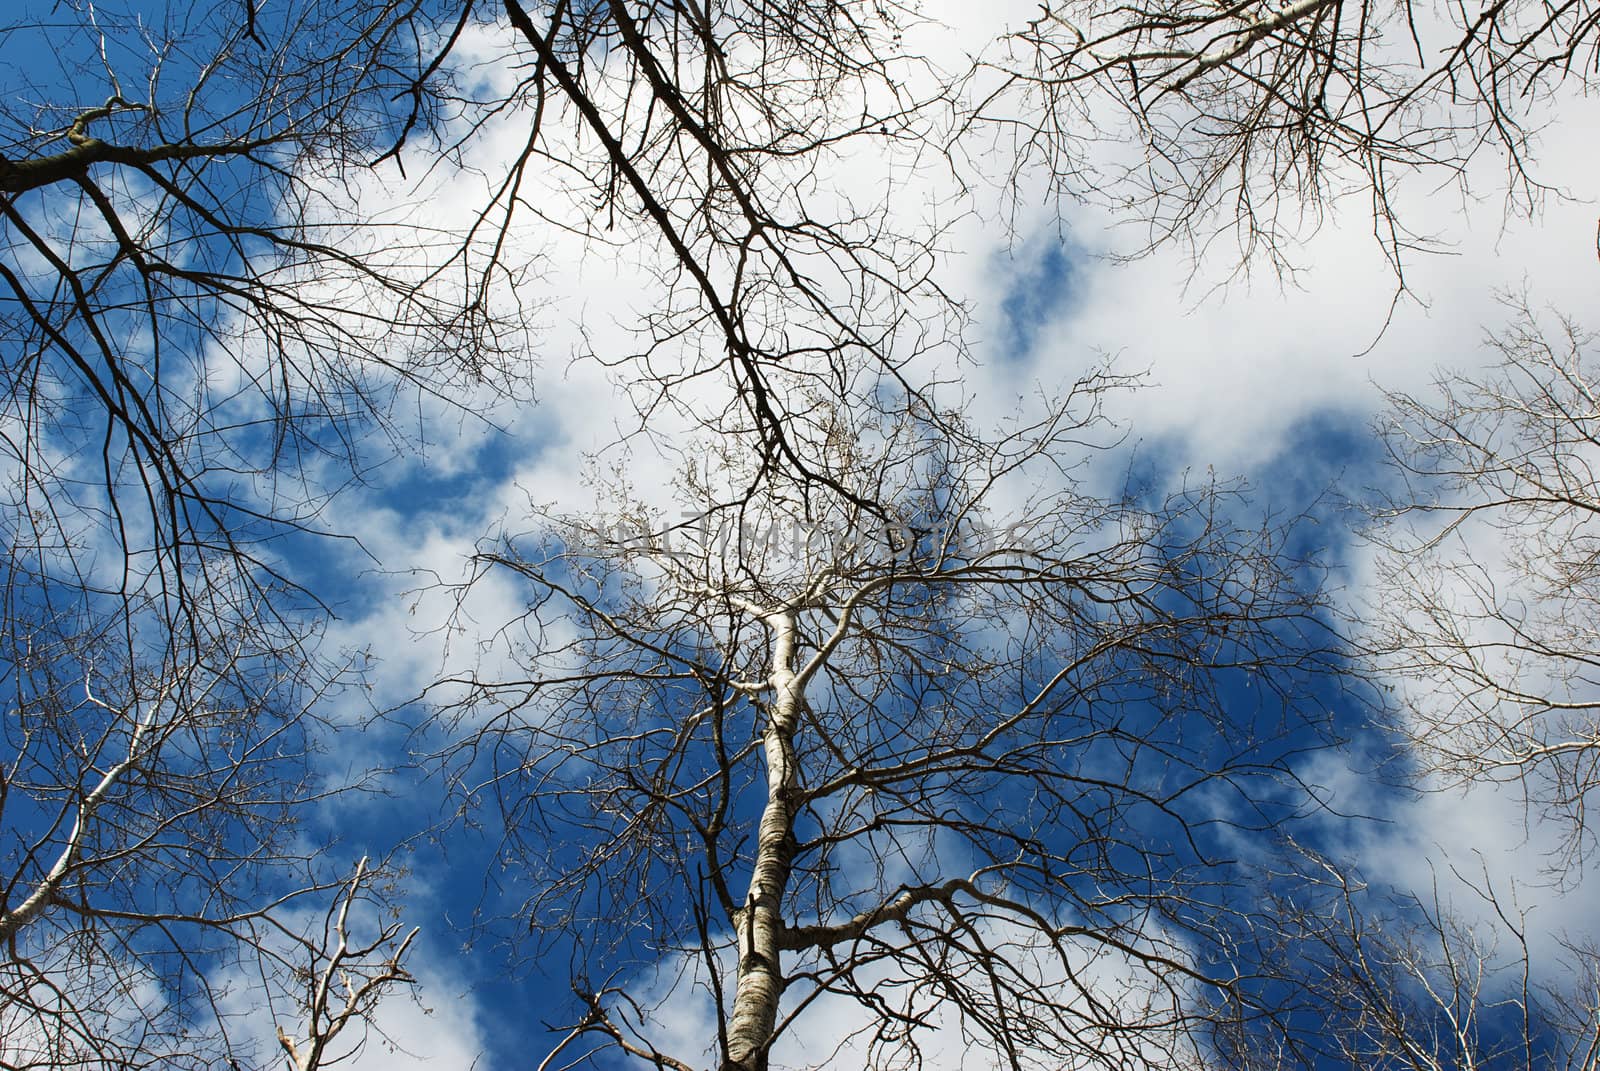 Birch trees with a blue sky background.